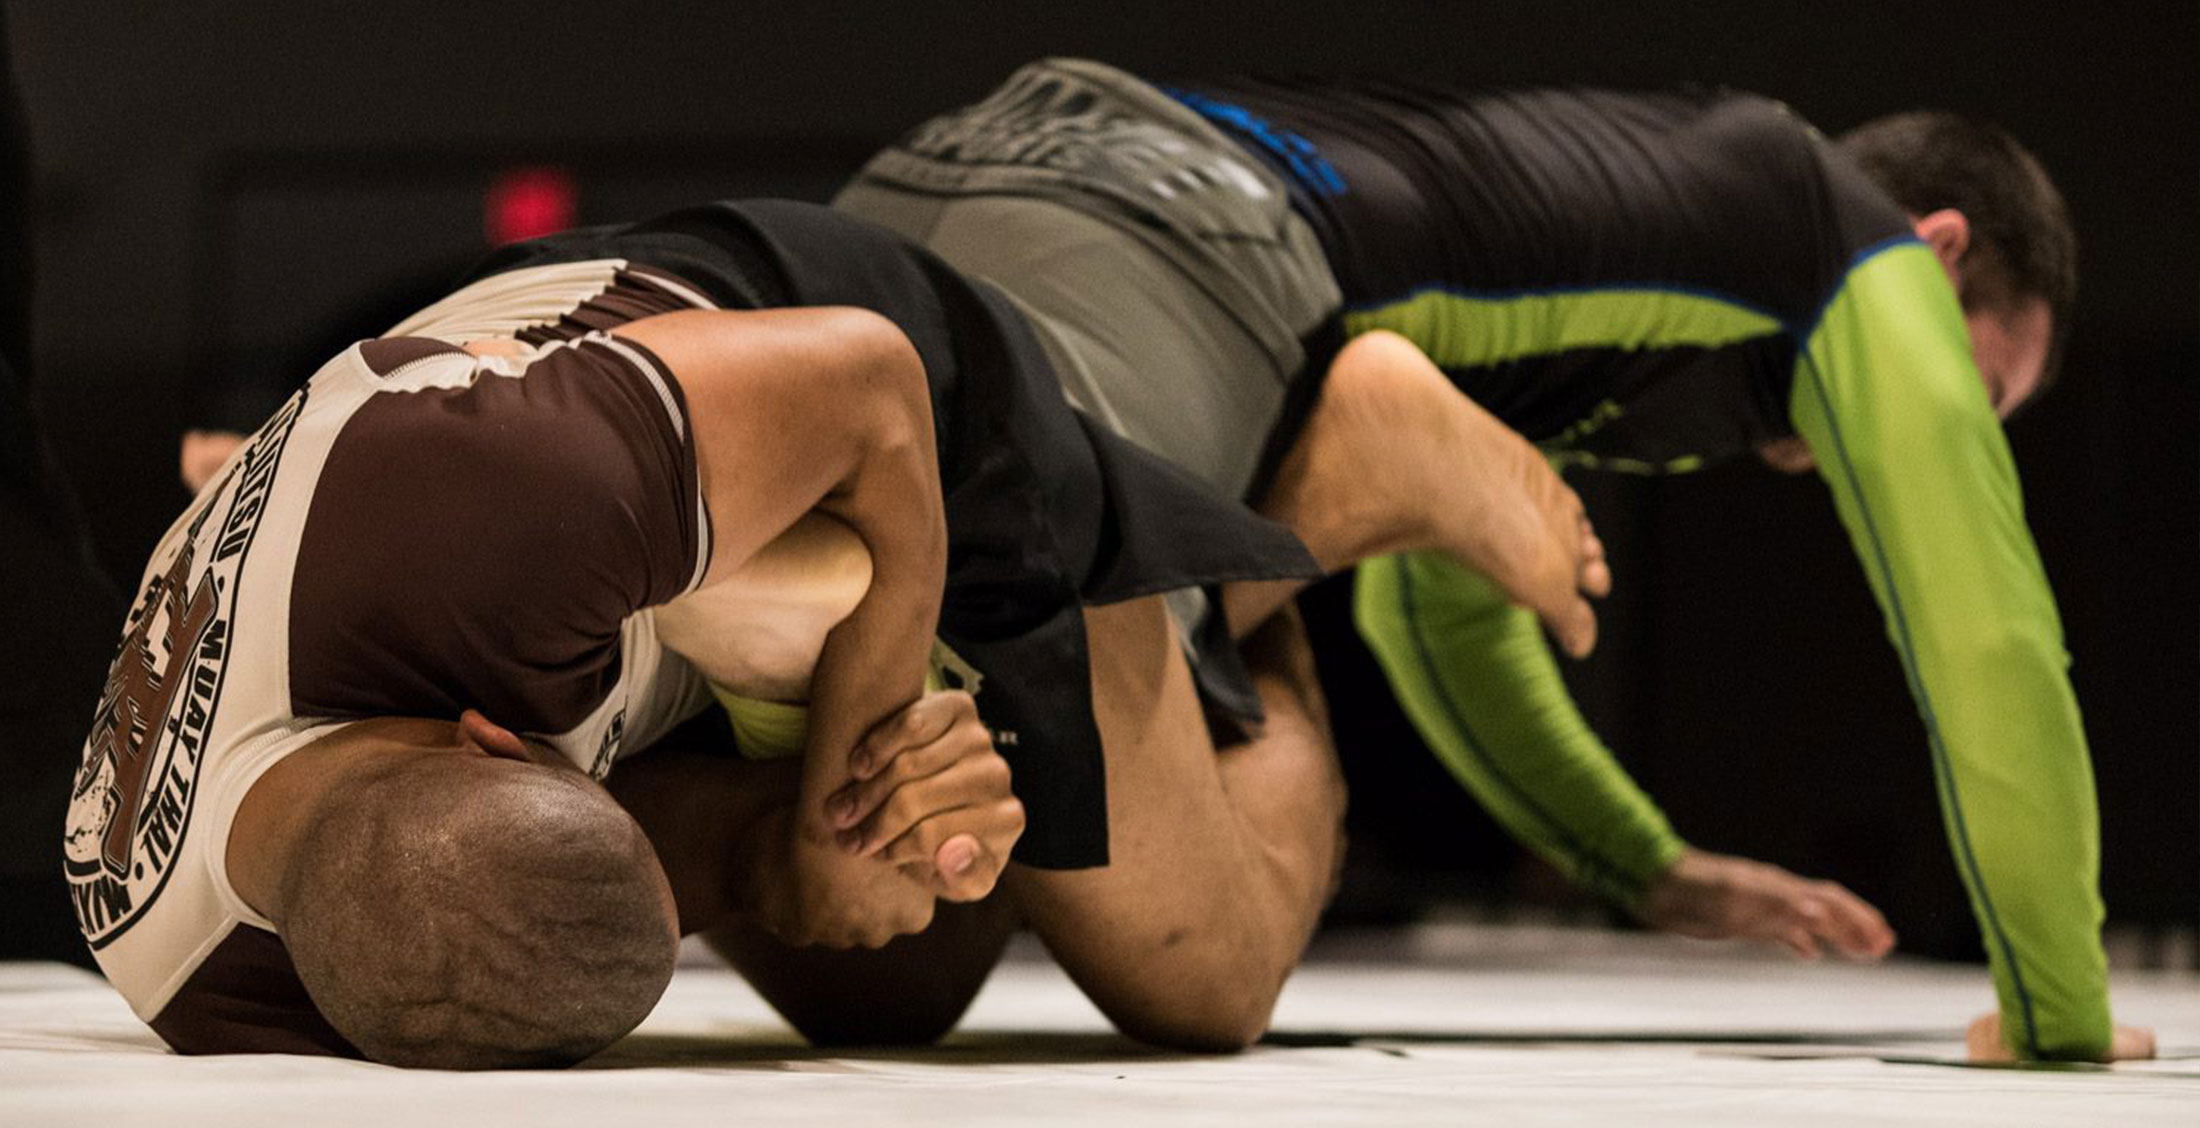 Sean cinching up a heel hook at his second professional grappling match